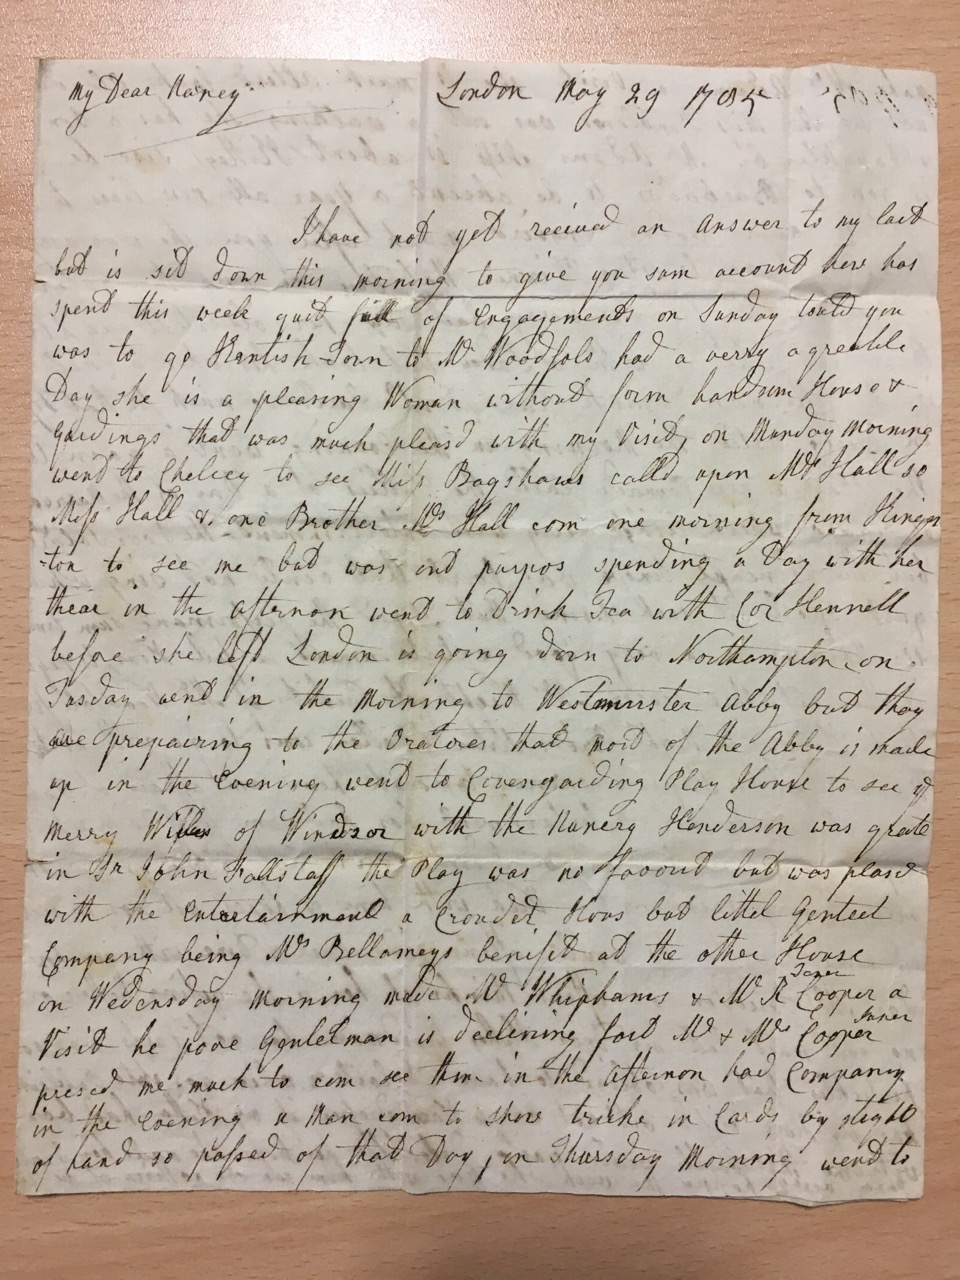 Image #1 of letter: Catherine Elliott to Ann Hare, 29 May 1785